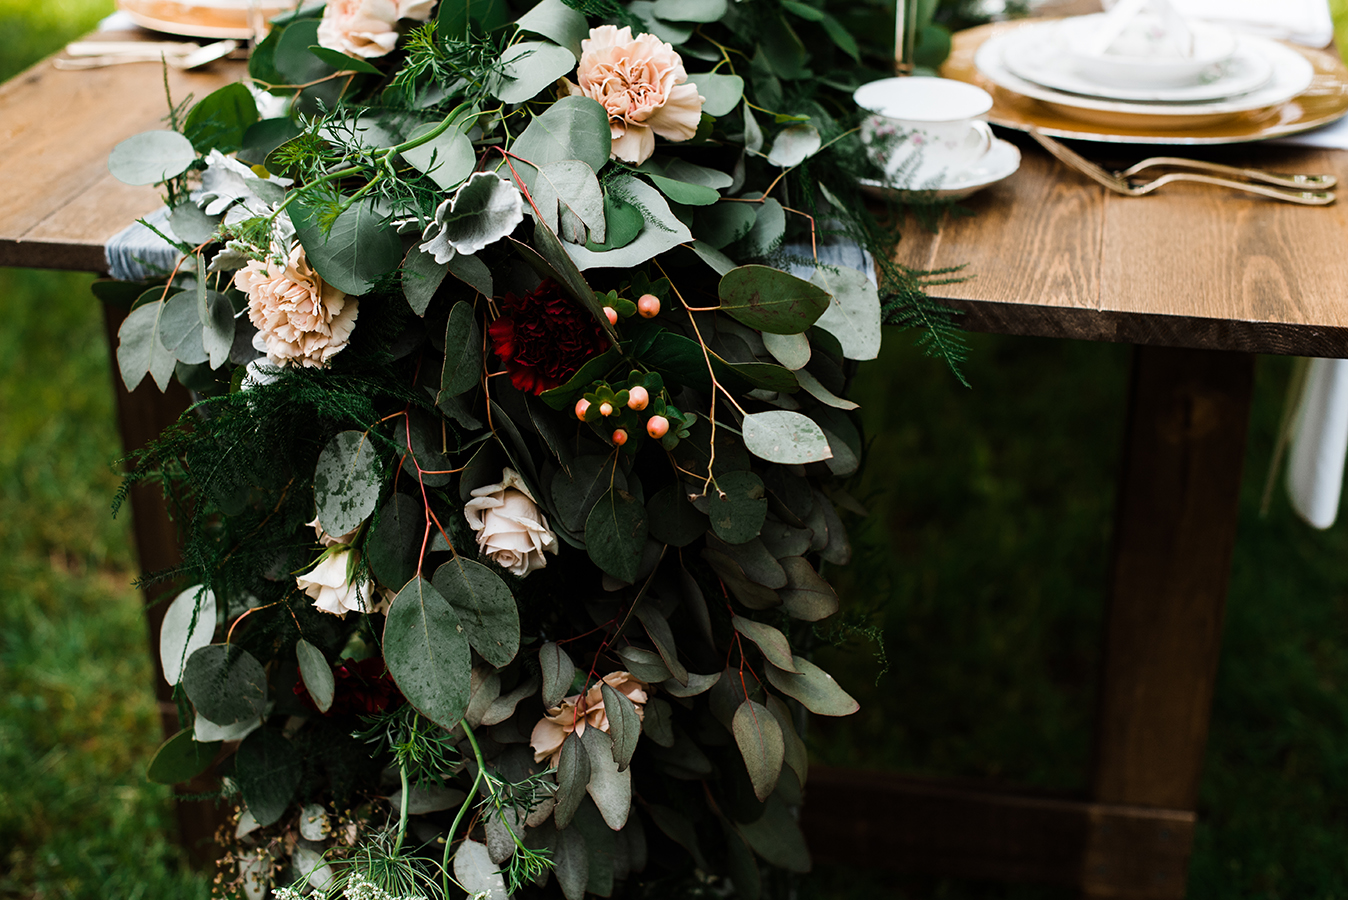  ^ Garland by  Shaffer Creative Co ; Styled shoot for  Henry Manor  styled by  Irish Eyes Photo  &  A Wedding by Sylvia ; Photographed by us! 